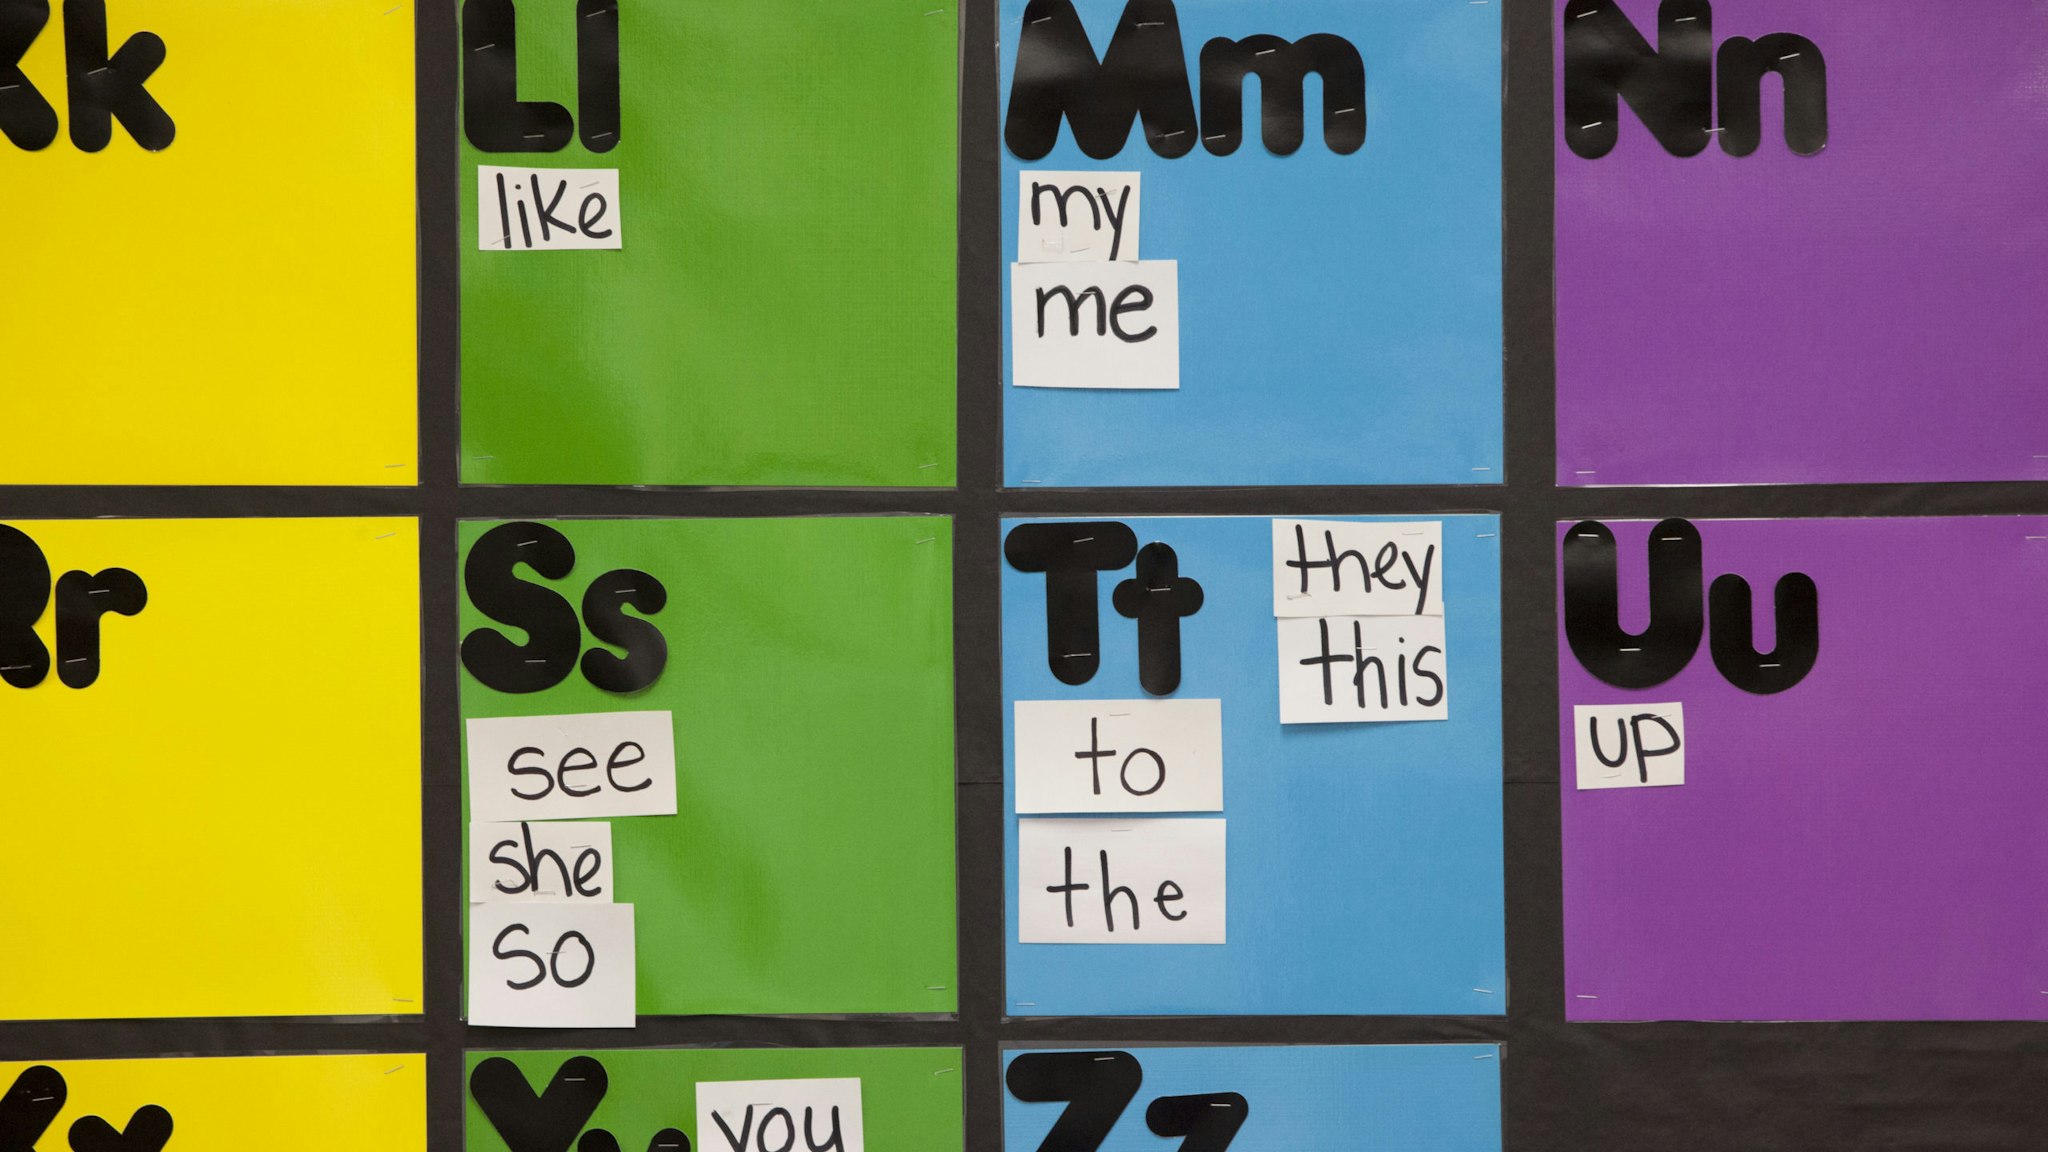 NEW ORLEANS, LA - JANUARY 16: The alphabet covers a bulletin board in a kindergarten class at Sylvanie Williams College Prep elementary school, on January 16, 2015 in New Orleans, Louisiana. New principal Krystal Hardy spends most of her time out of her office mentoring teachers and staff and spending time with the children. She is the face of the new type of principal. Fifty percent of the children here started the year below grade level in reading and math. The goal is to help them catch up and keep making progress. (Photo by Melanie Stetson Freeman/The Christian Science Monitor via Getty Images)